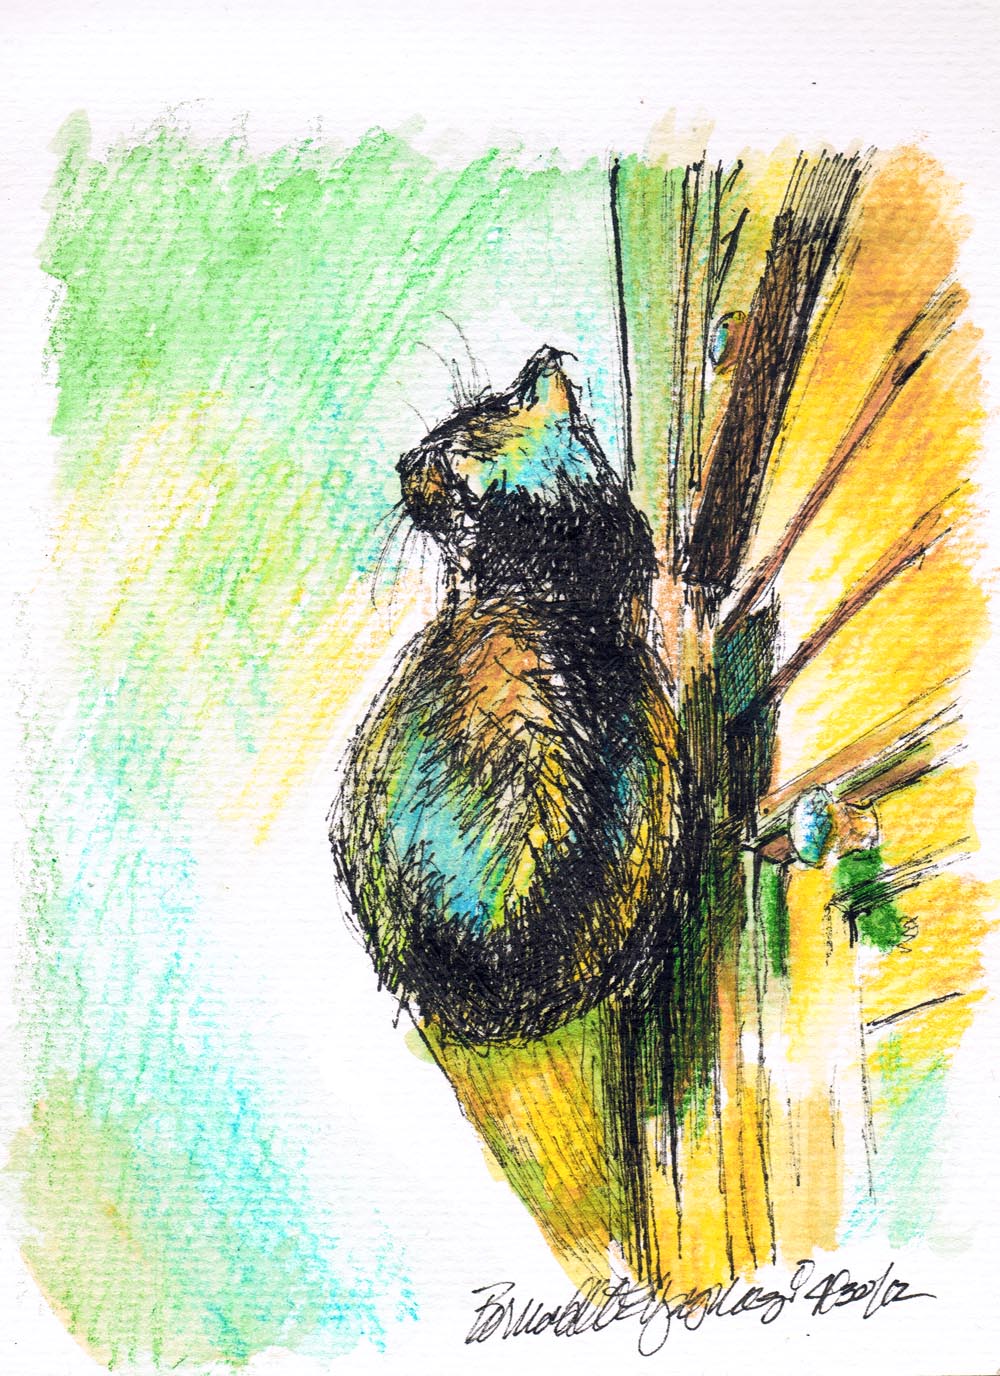 ink and watercolor sketch of cat